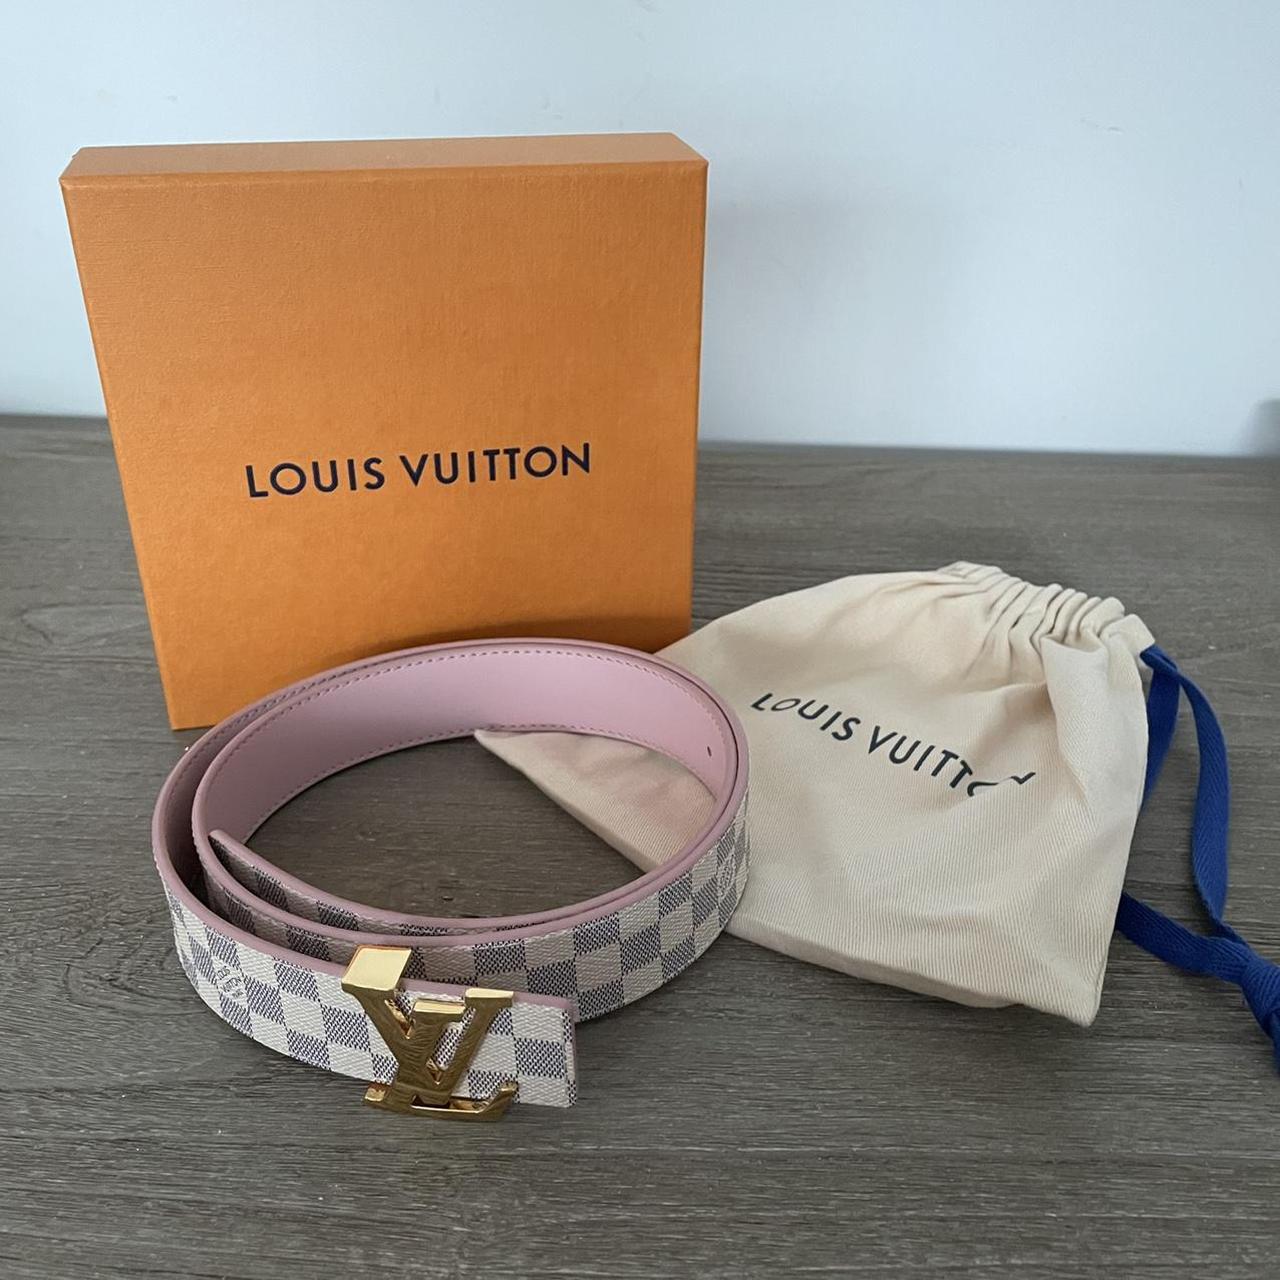 Lv belts, in Lindfield, West Sussex